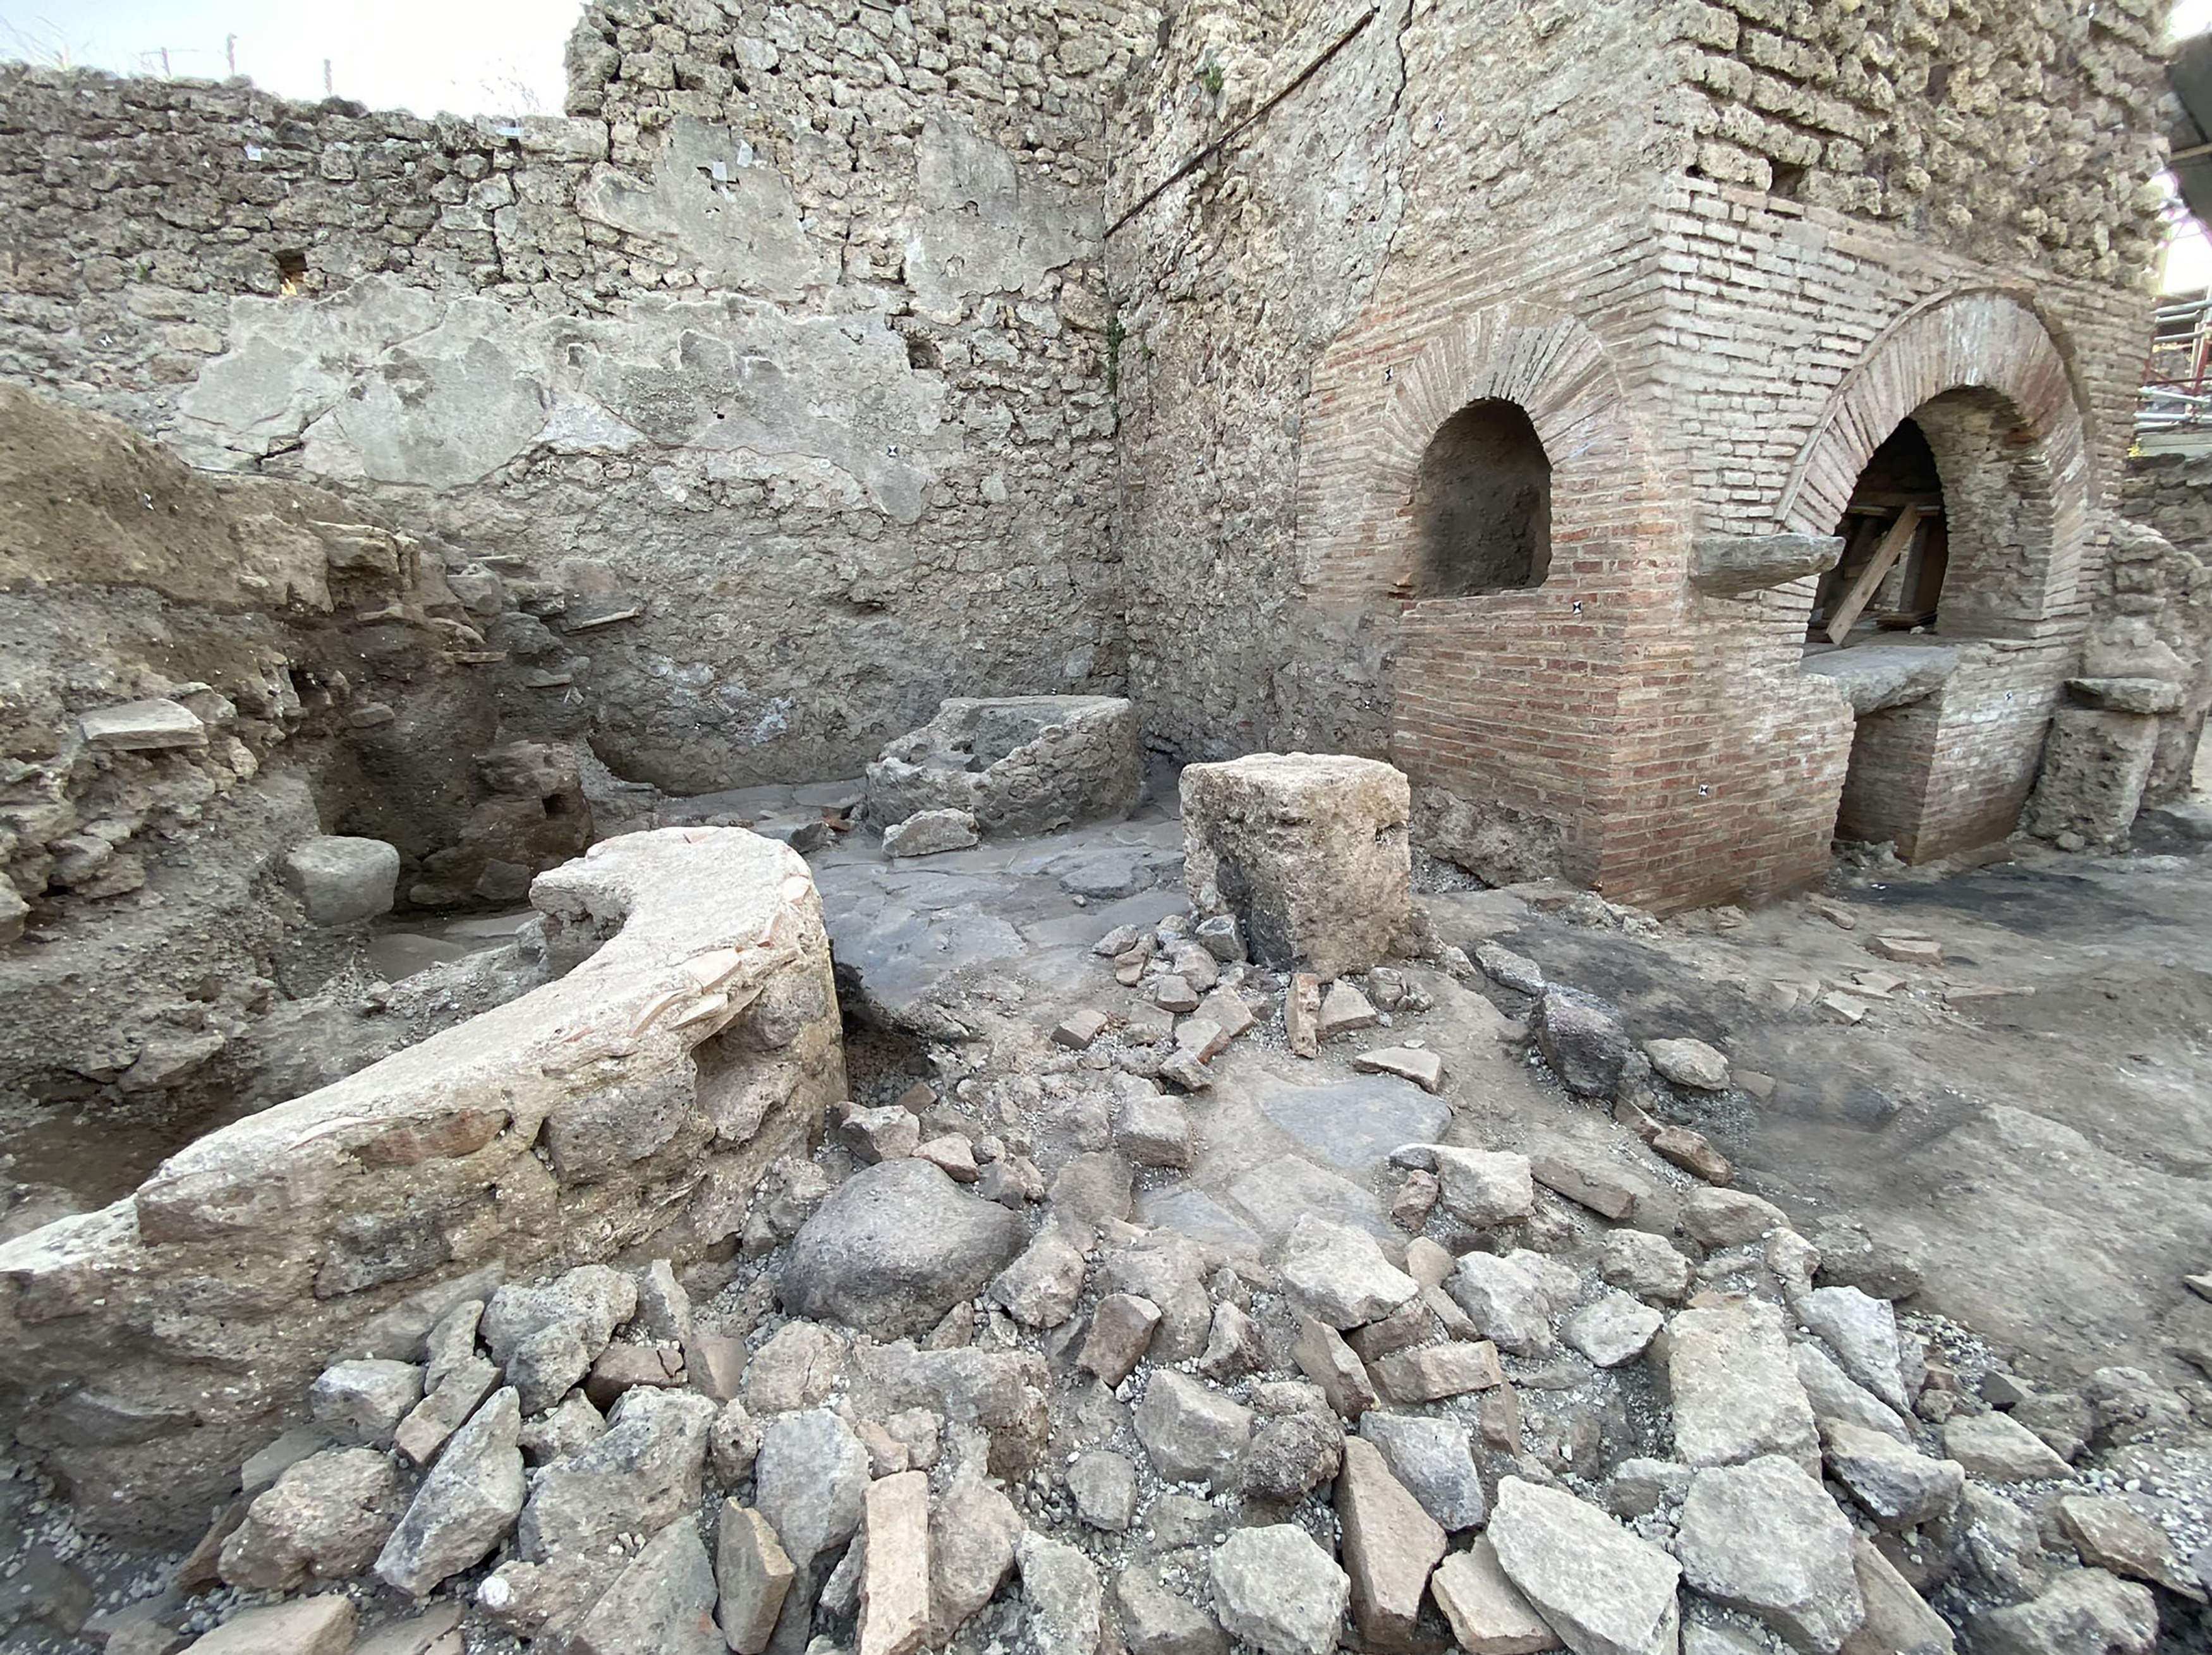 A prison-bakery has been discovered in the ancient Roman city of Pompeii. Photo: AFP